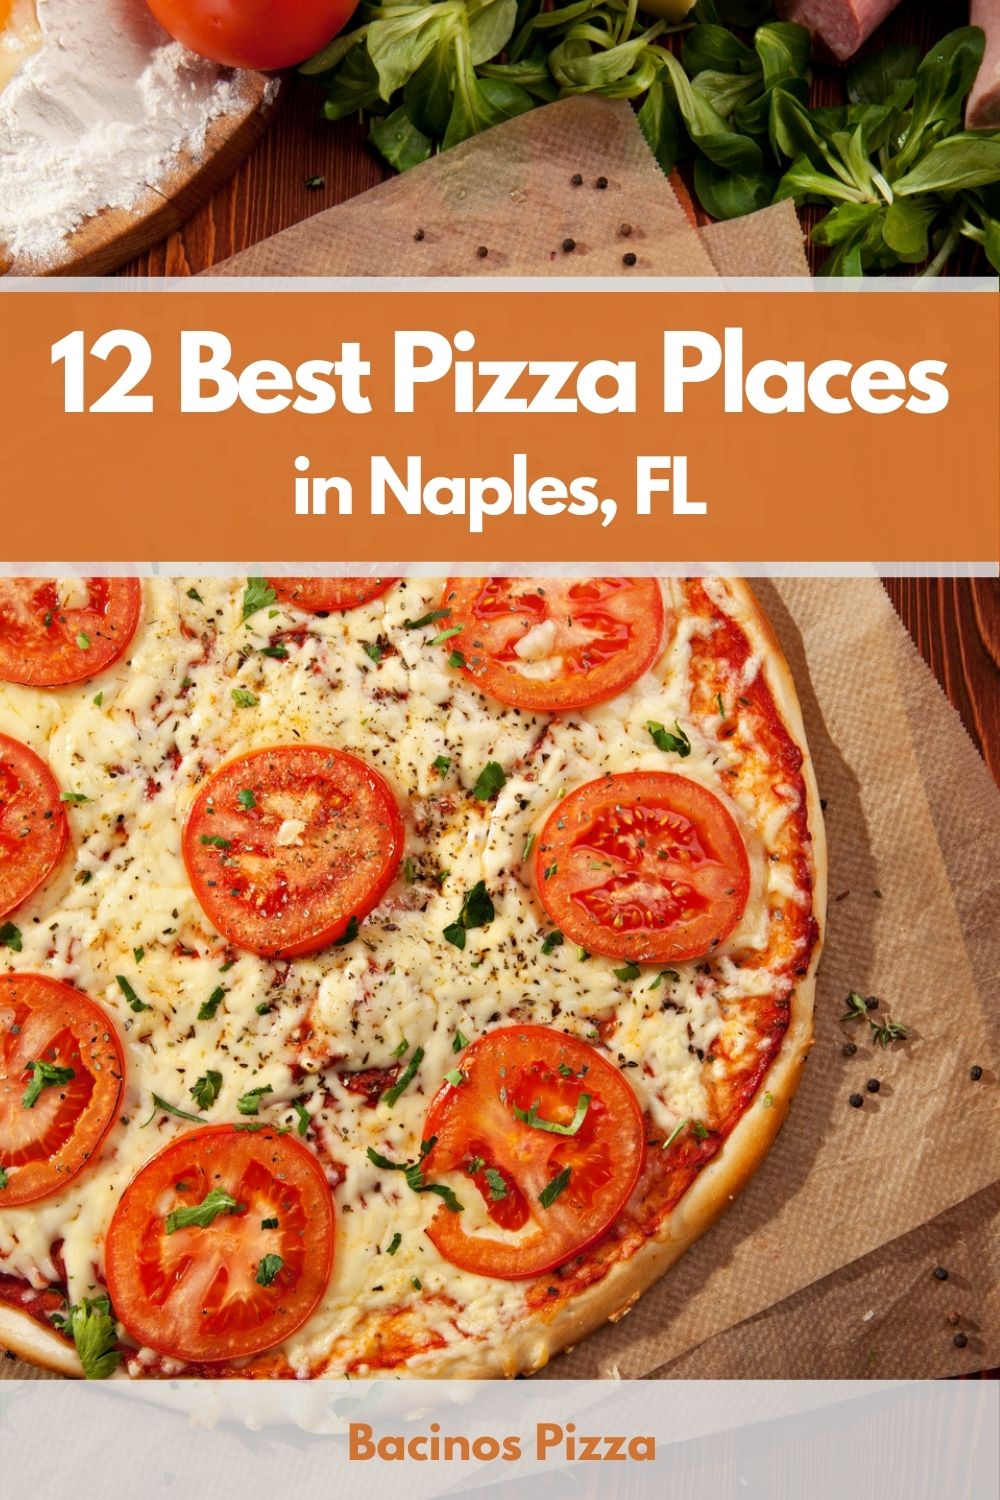 12 Best Pizza Places in Naples, FL pin 2